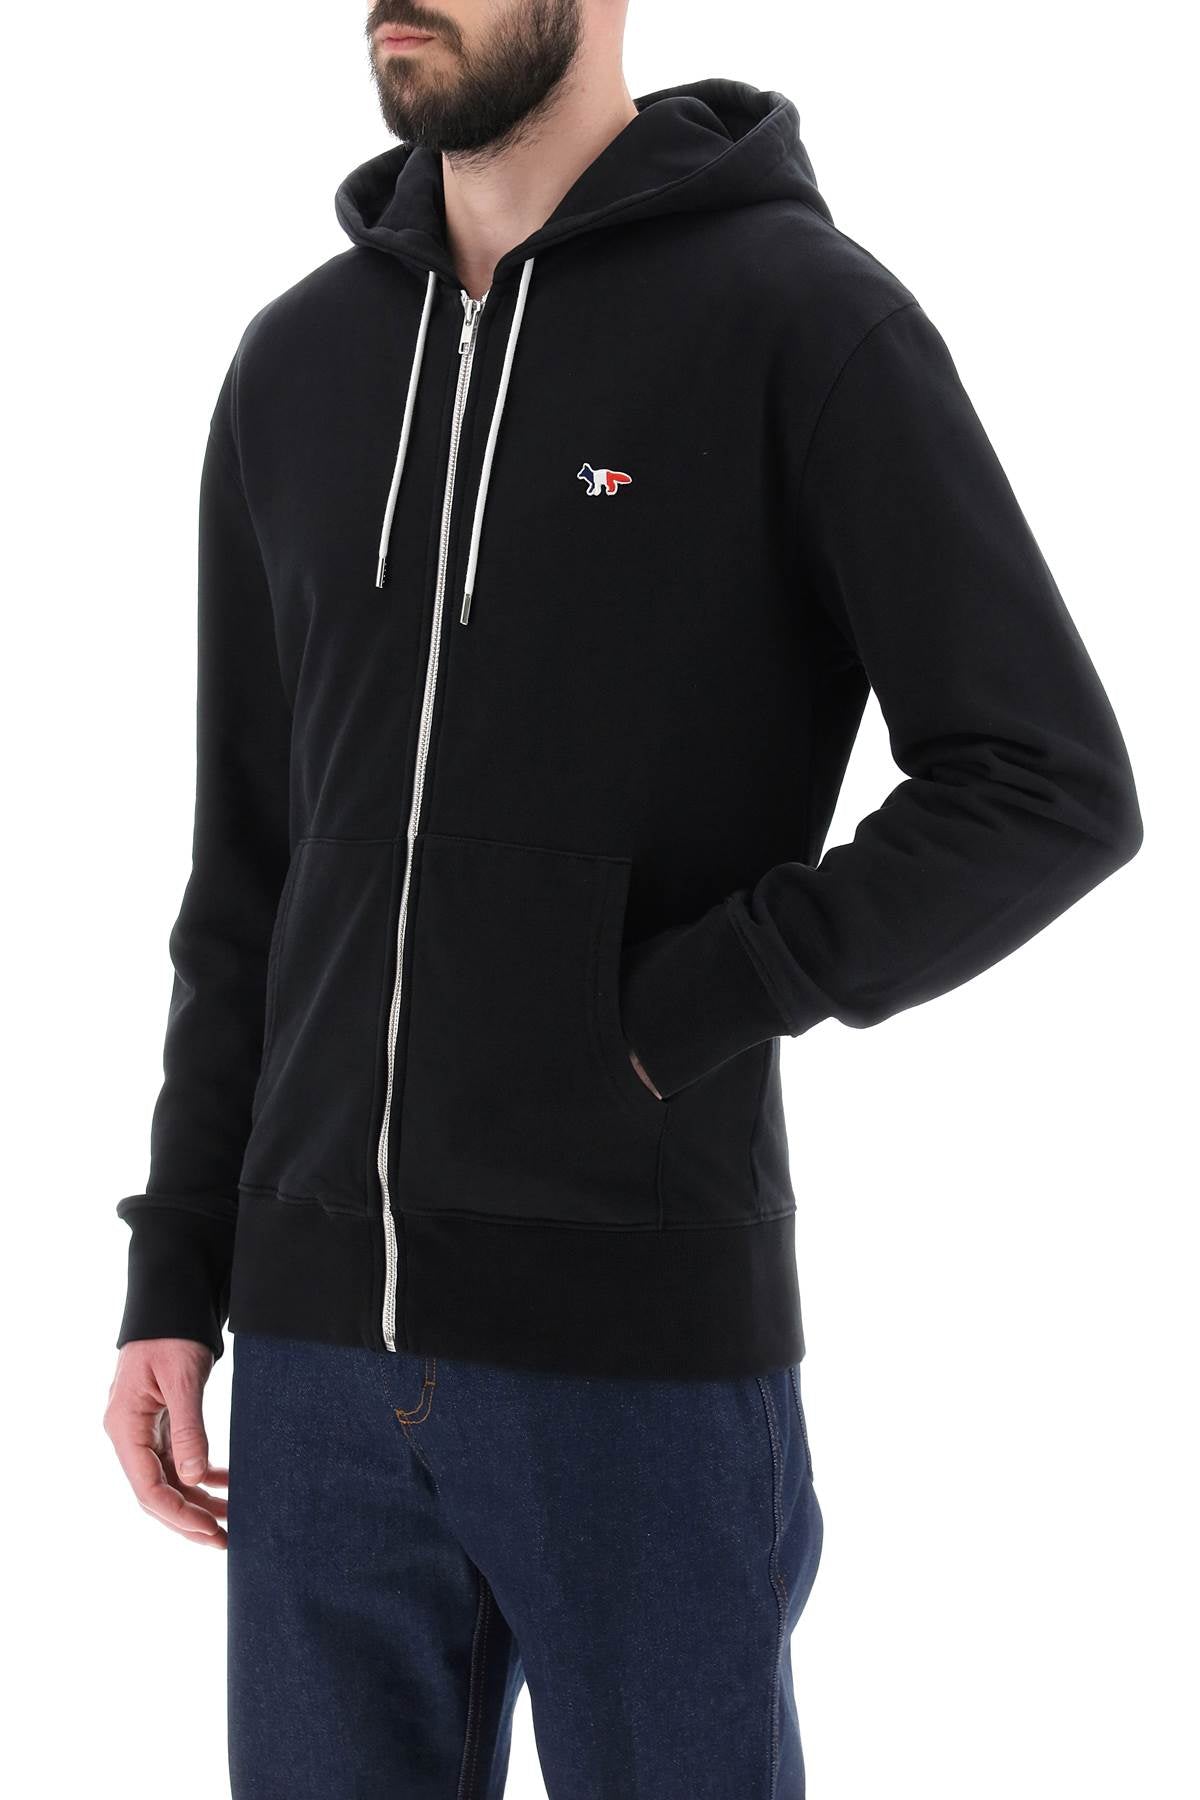 Maison kitsune full zip hoodie with tricolor fox patch